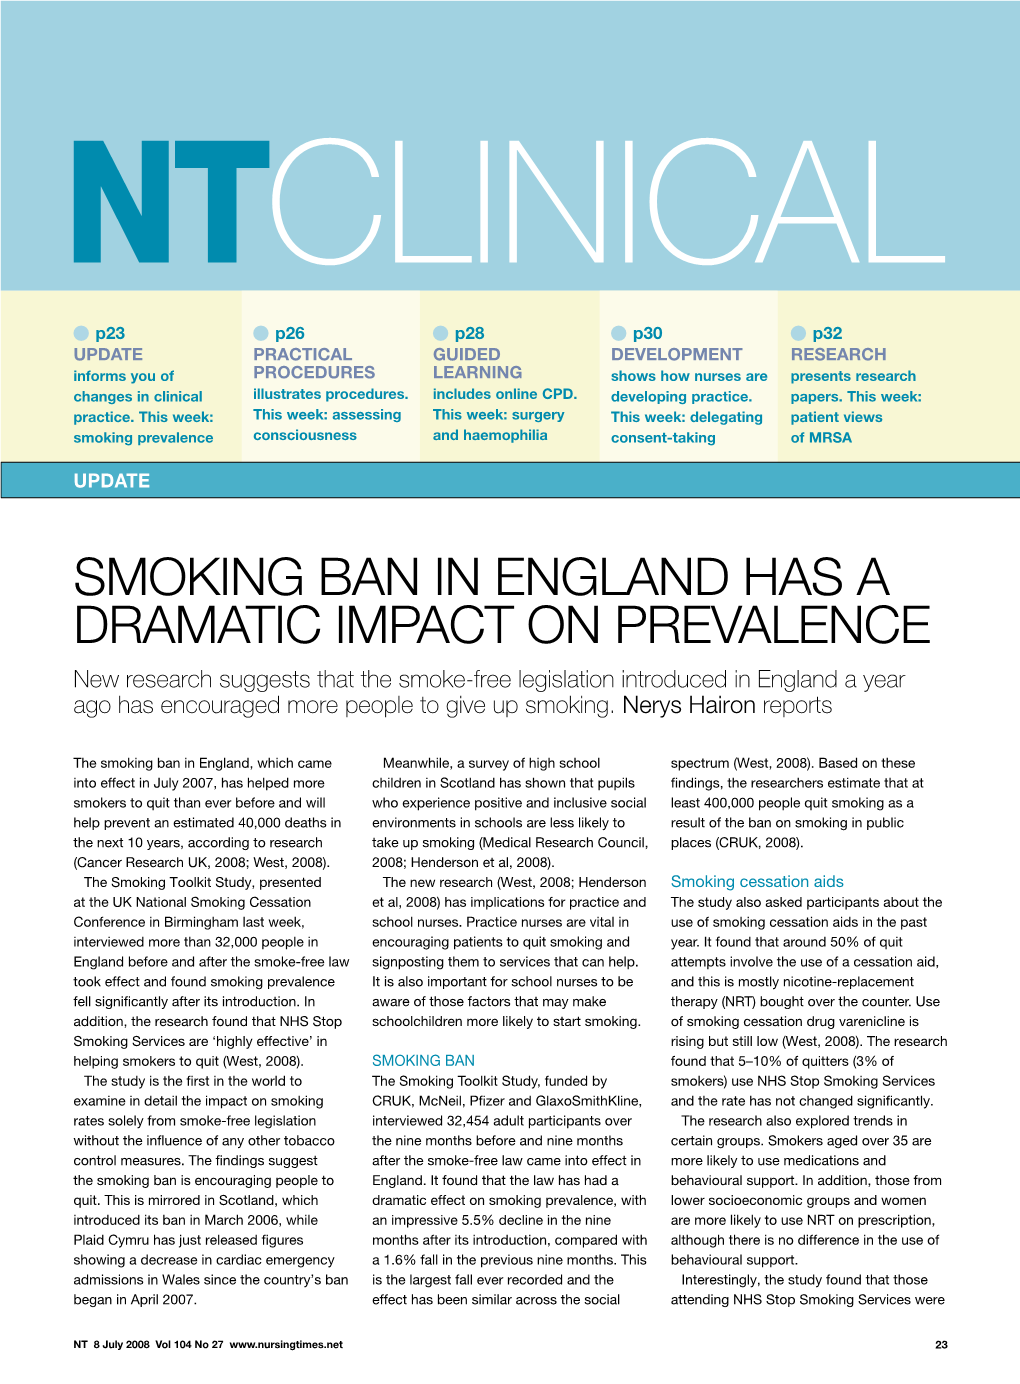 Smoking Ban in England Has a Dramatic Impact On